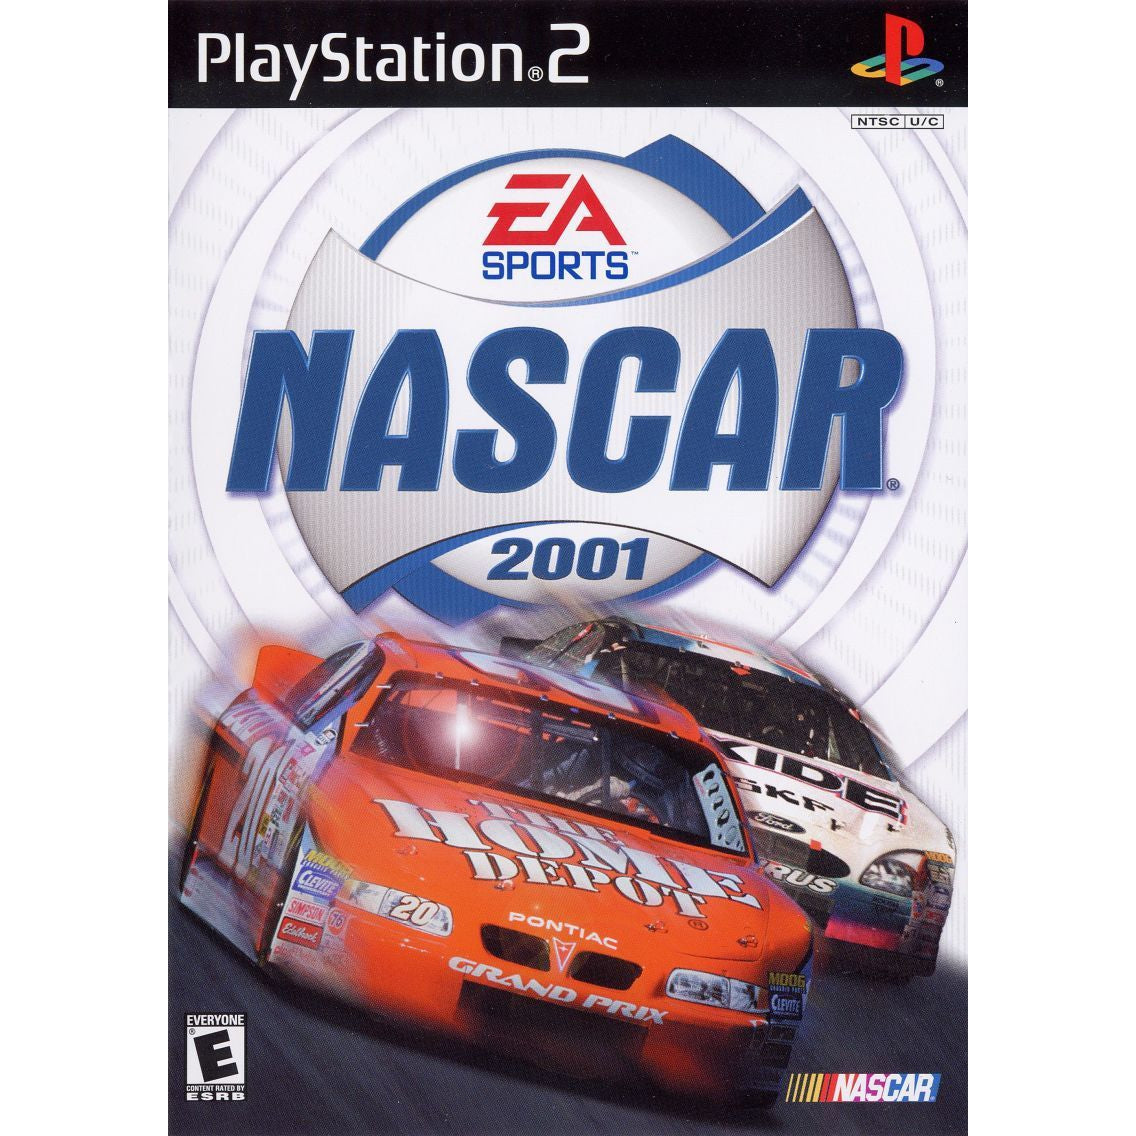 NASCAR 2001 - PlayStation 2 (PS2) Game Complete - YourGamingShop.com - Buy, Sell, Trade Video Games Online. 120 Day Warranty. Satisfaction Guaranteed.